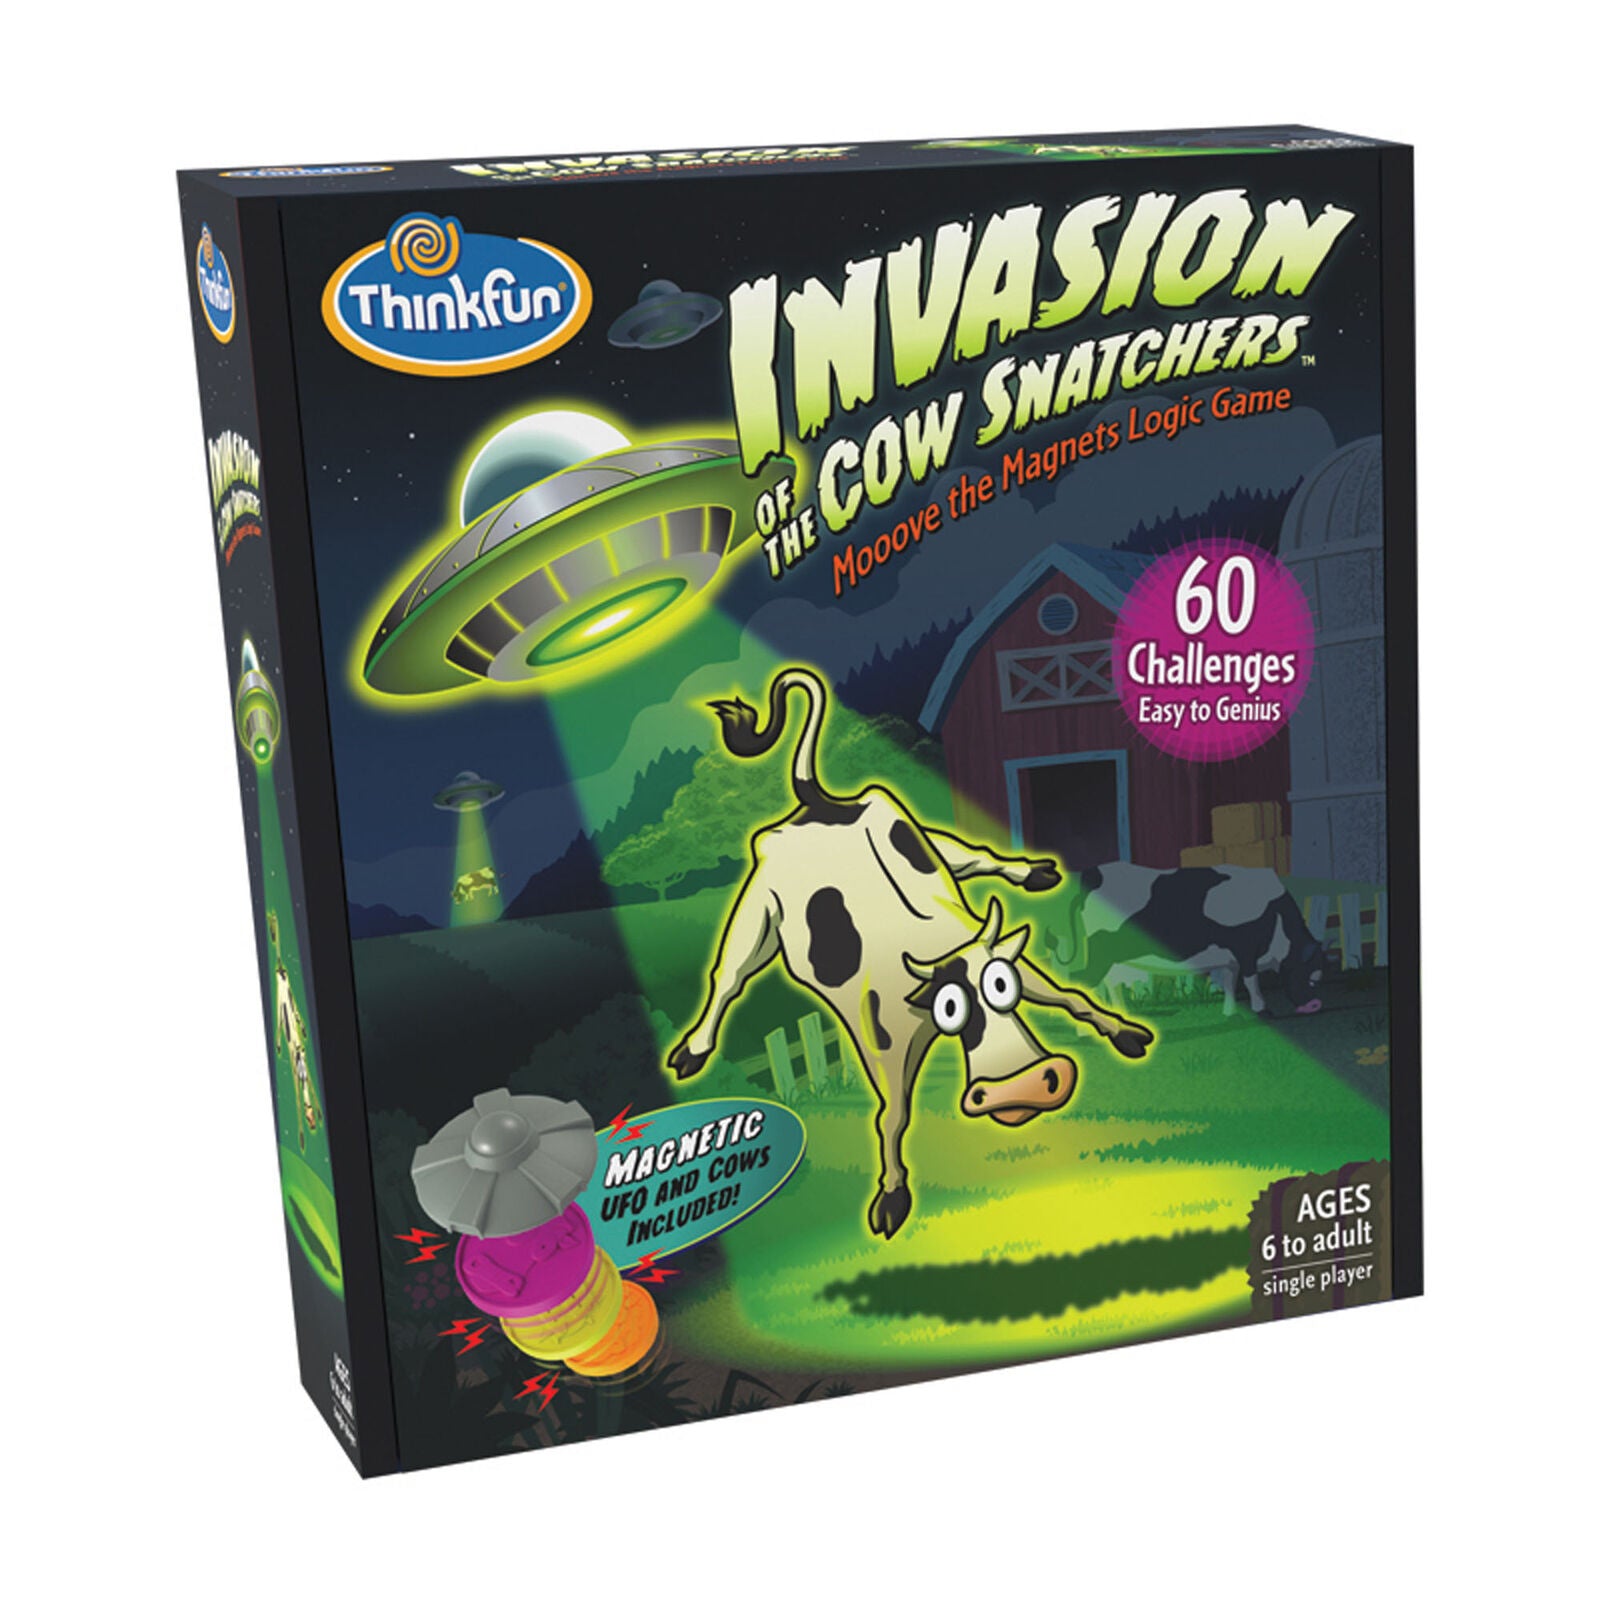 44001021 Ravensburger Invasion of the Cow Snatcher Magnetic Game Age 6 Years+